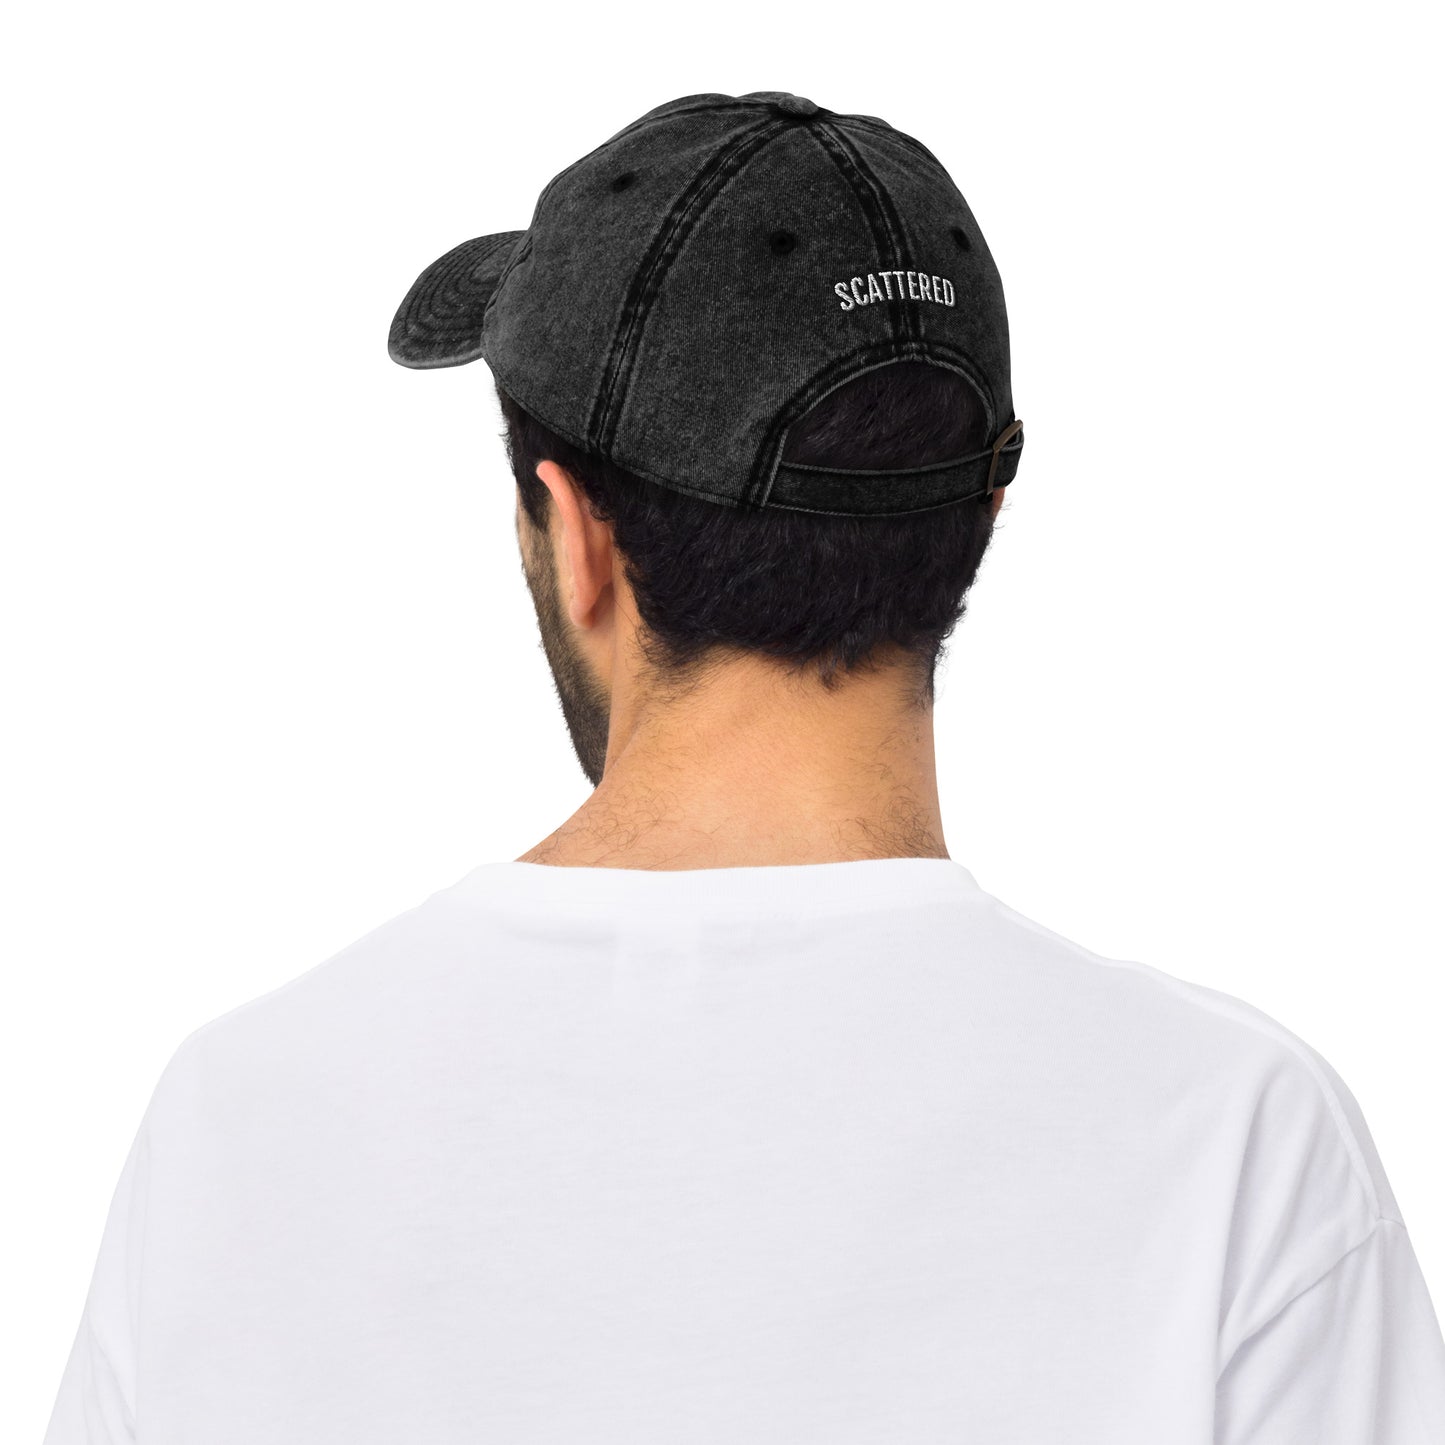 New York Apple Logo Embroidered Black Vintage Cotton Twill Hat Scattered Streetwear